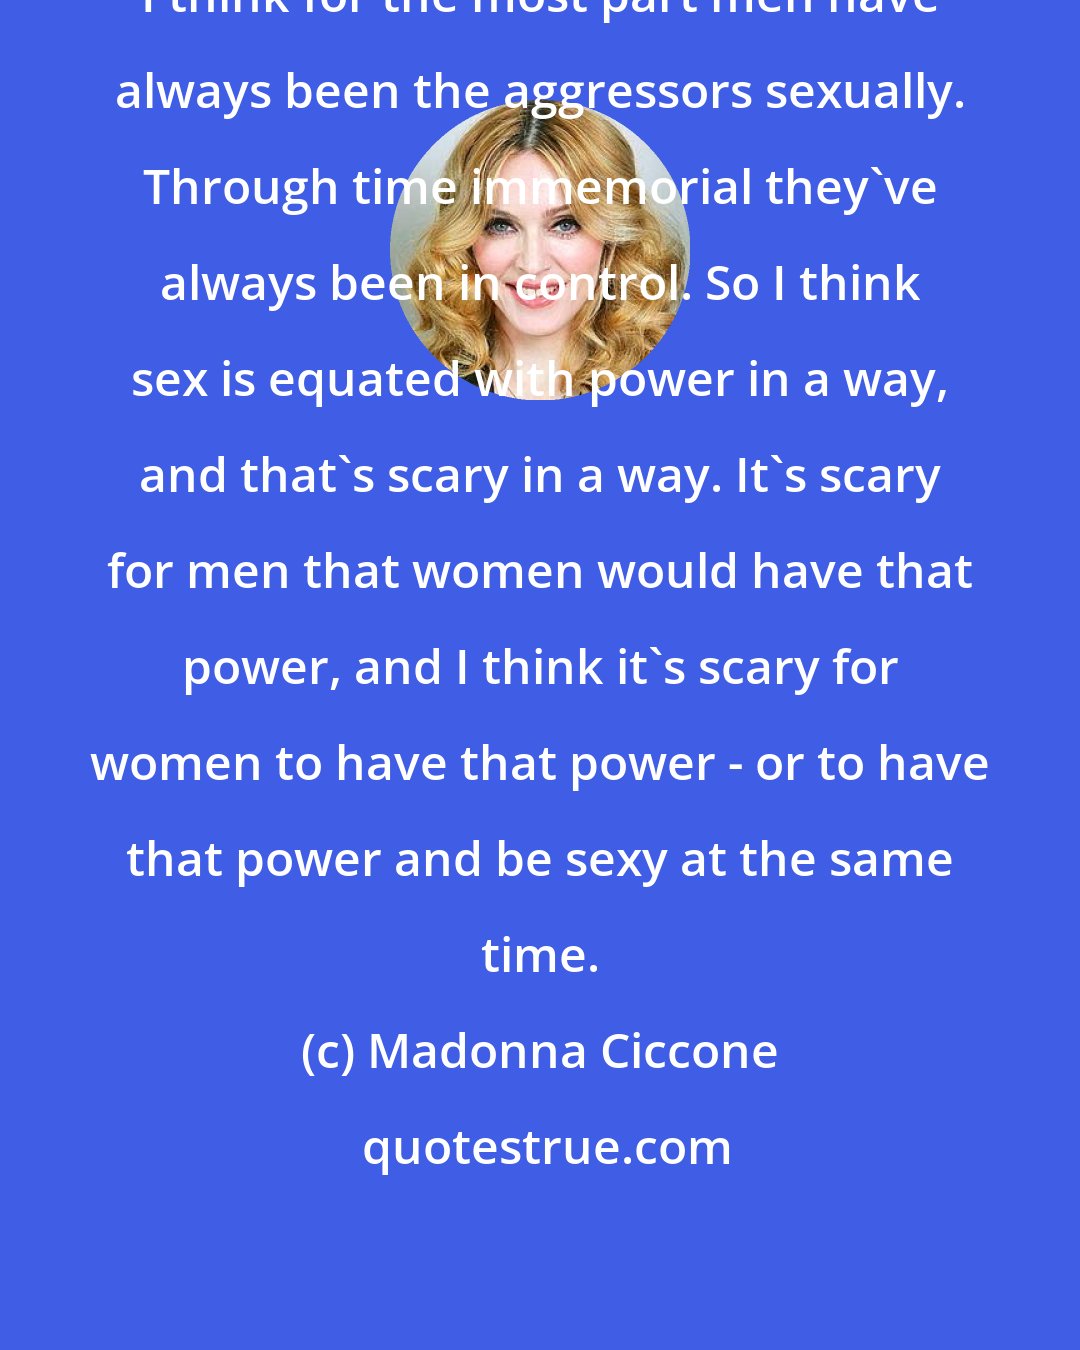 Madonna Ciccone: I think for the most part men have always been the aggressors sexually. Through time immemorial they've always been in control. So I think sex is equated with power in a way, and that's scary in a way. It's scary for men that women would have that power, and I think it's scary for women to have that power - or to have that power and be sexy at the same time.